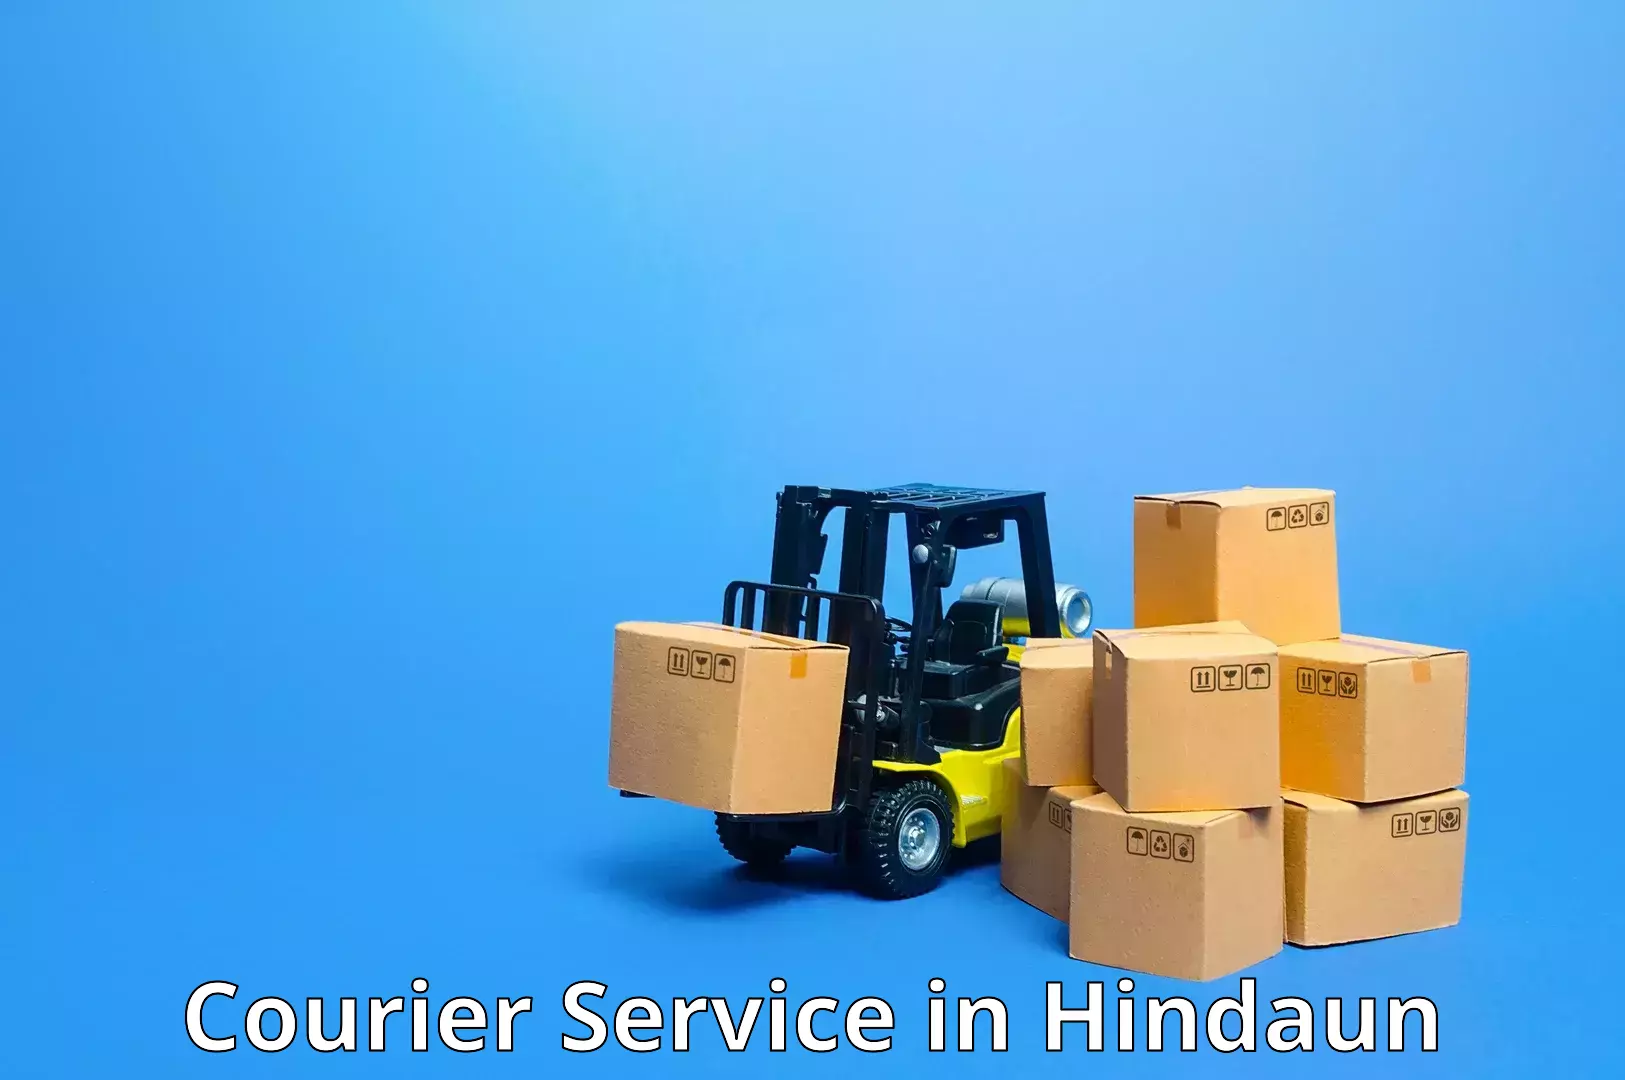 On-call courier service in Hindaun